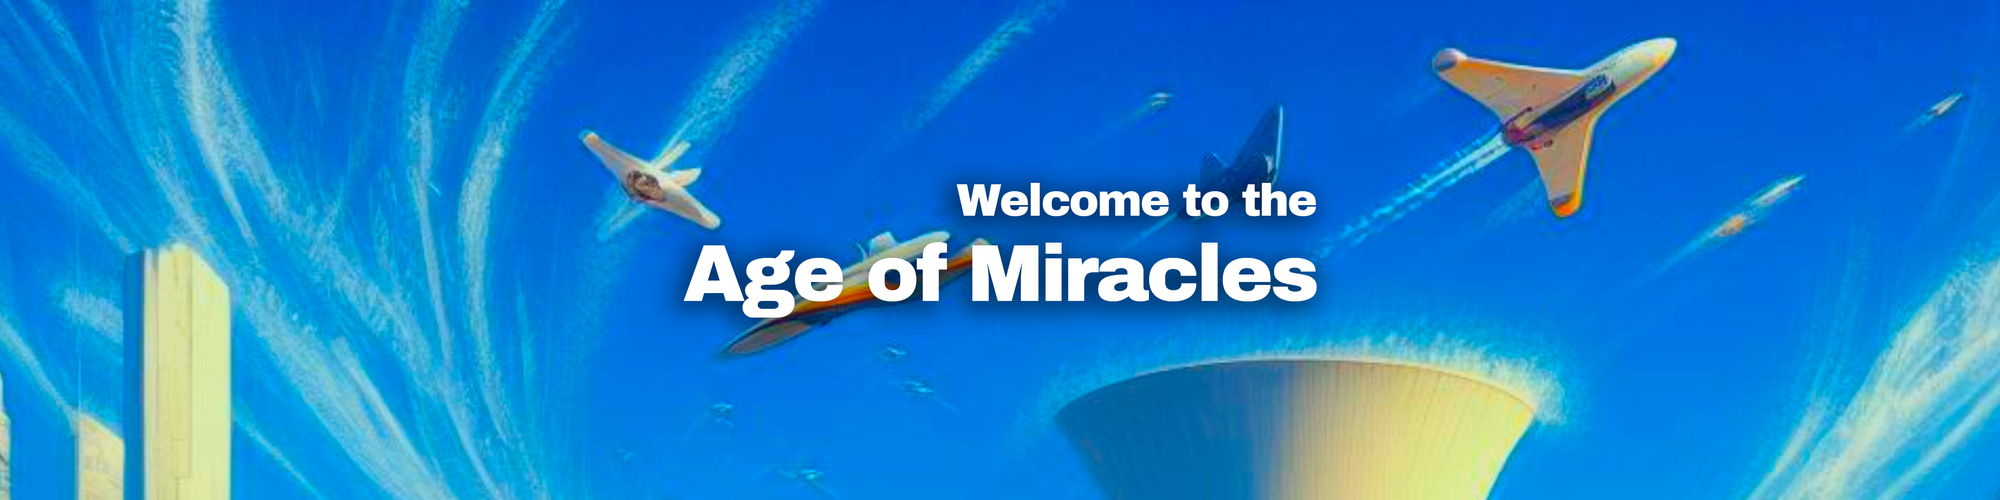 Age of Miracles Season 1: Nuclear Energy